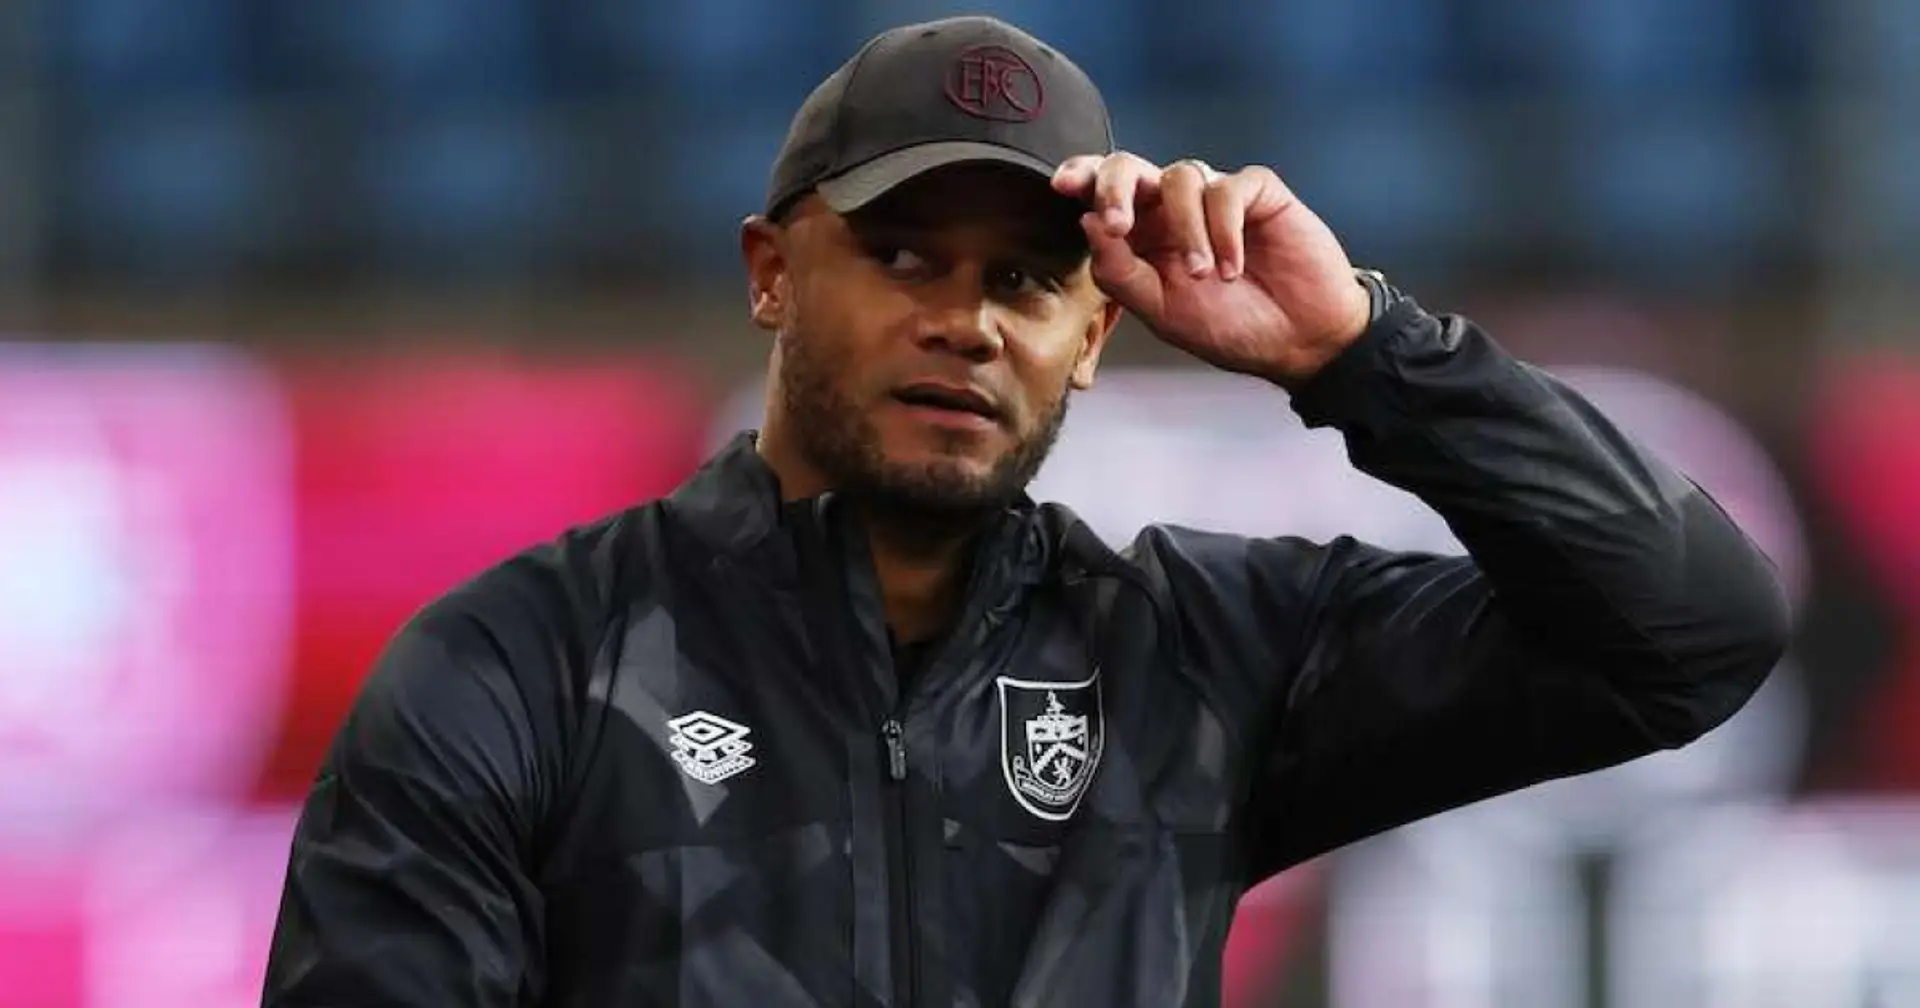 'They still have to work hard': Vincent Kompany suggests a radical plan to limit the number of games for top players